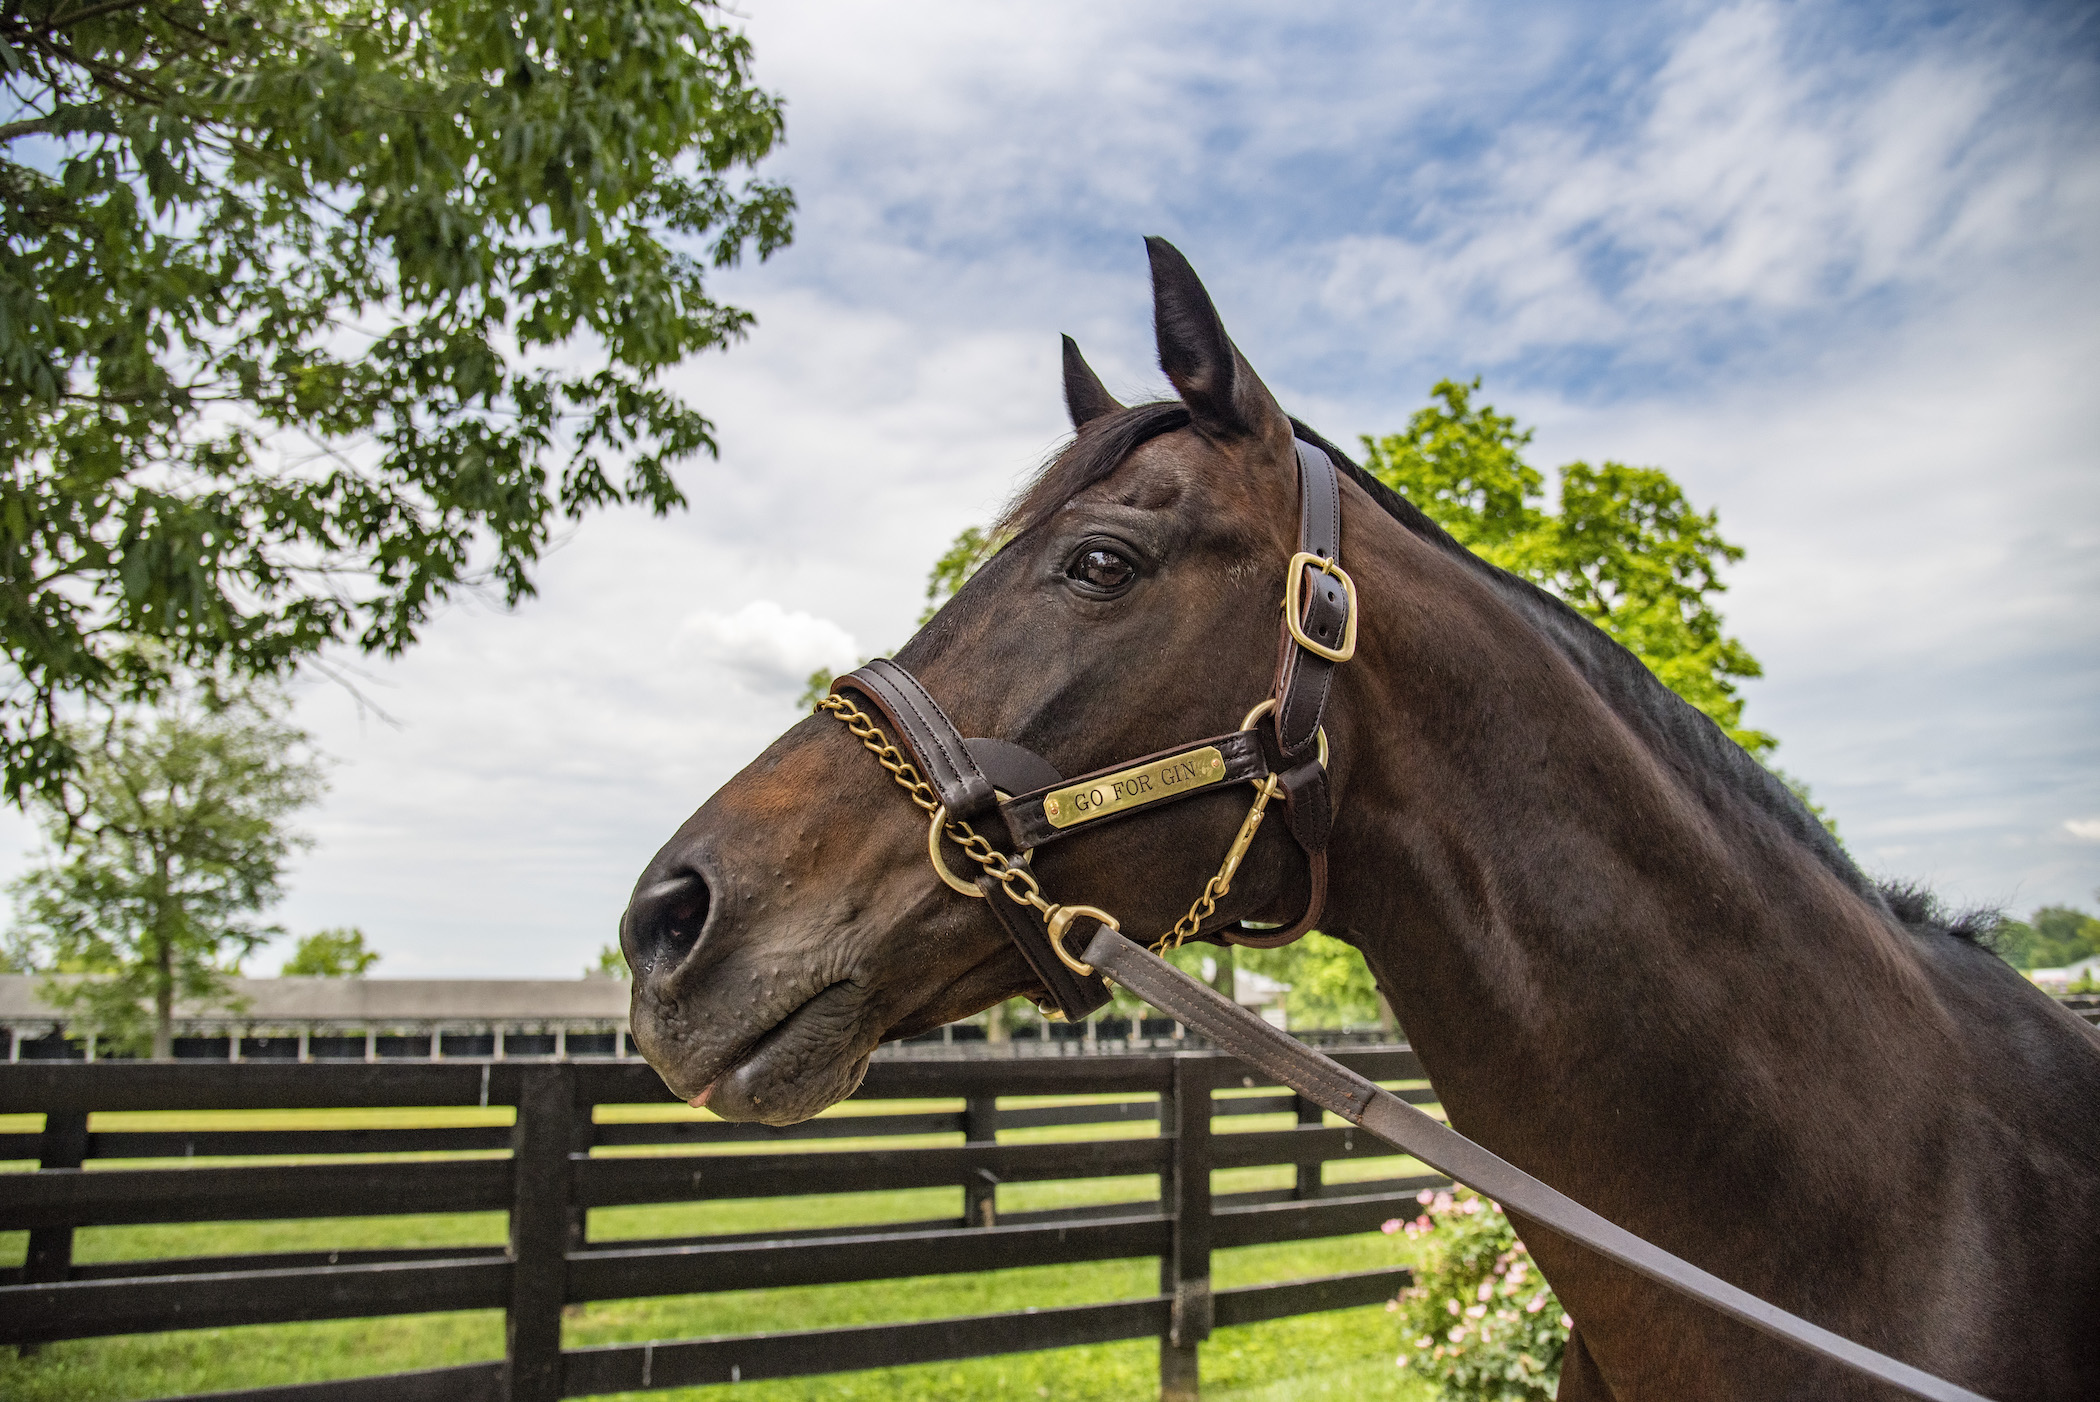 Naturally photogenic: “When you walk up to him, he is as pretty as any Thoroughbred you will ever look at,” says Rob Willis, manager at the Kentucky Horse Park Hall of Champions. Photo: Kentucky Horse Park